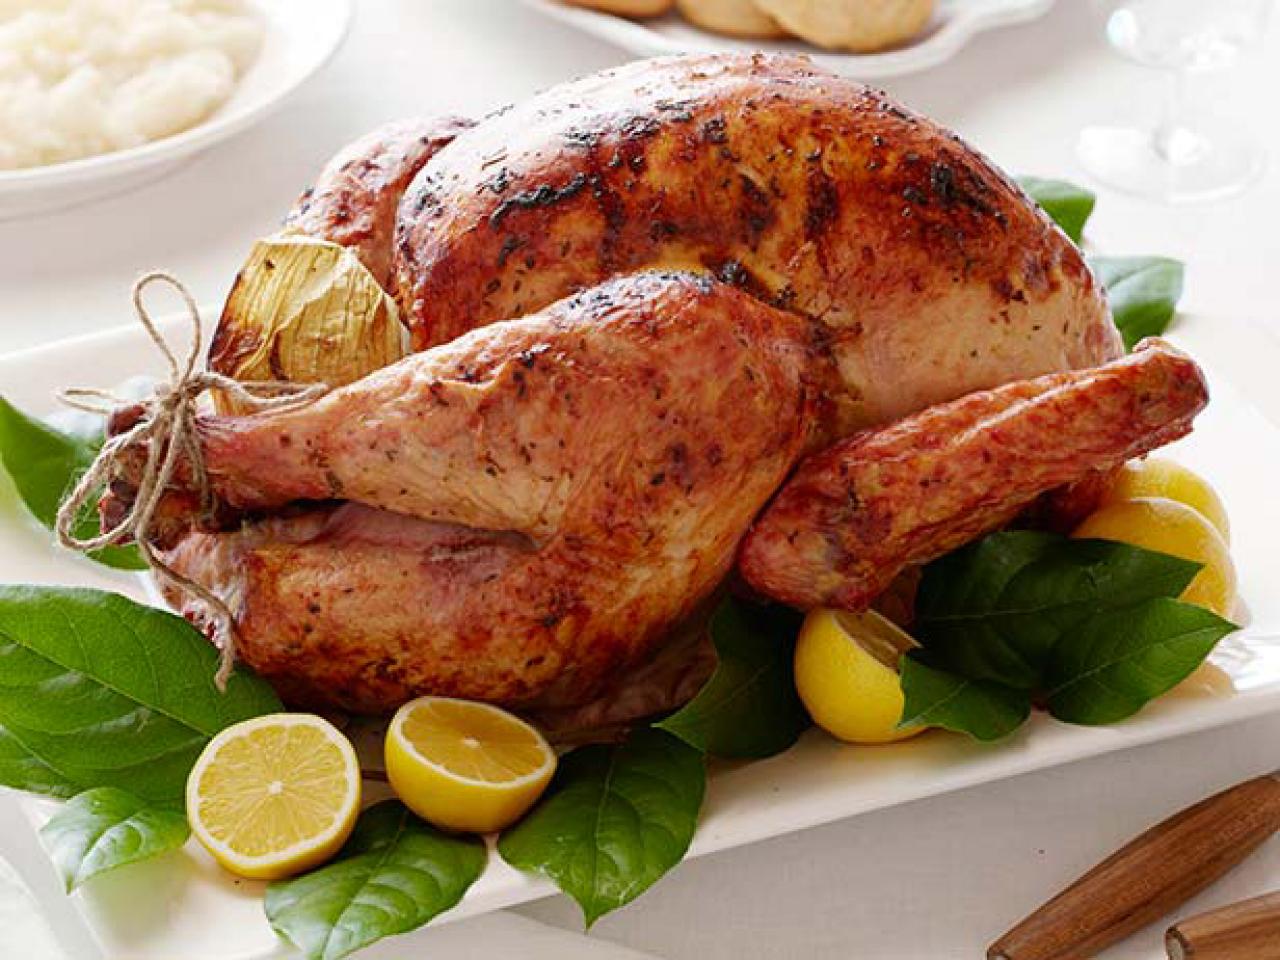 chefs-favorite-turkeys-fn-dish-behind-the-scenes-food-trends-and-best-recipes-food